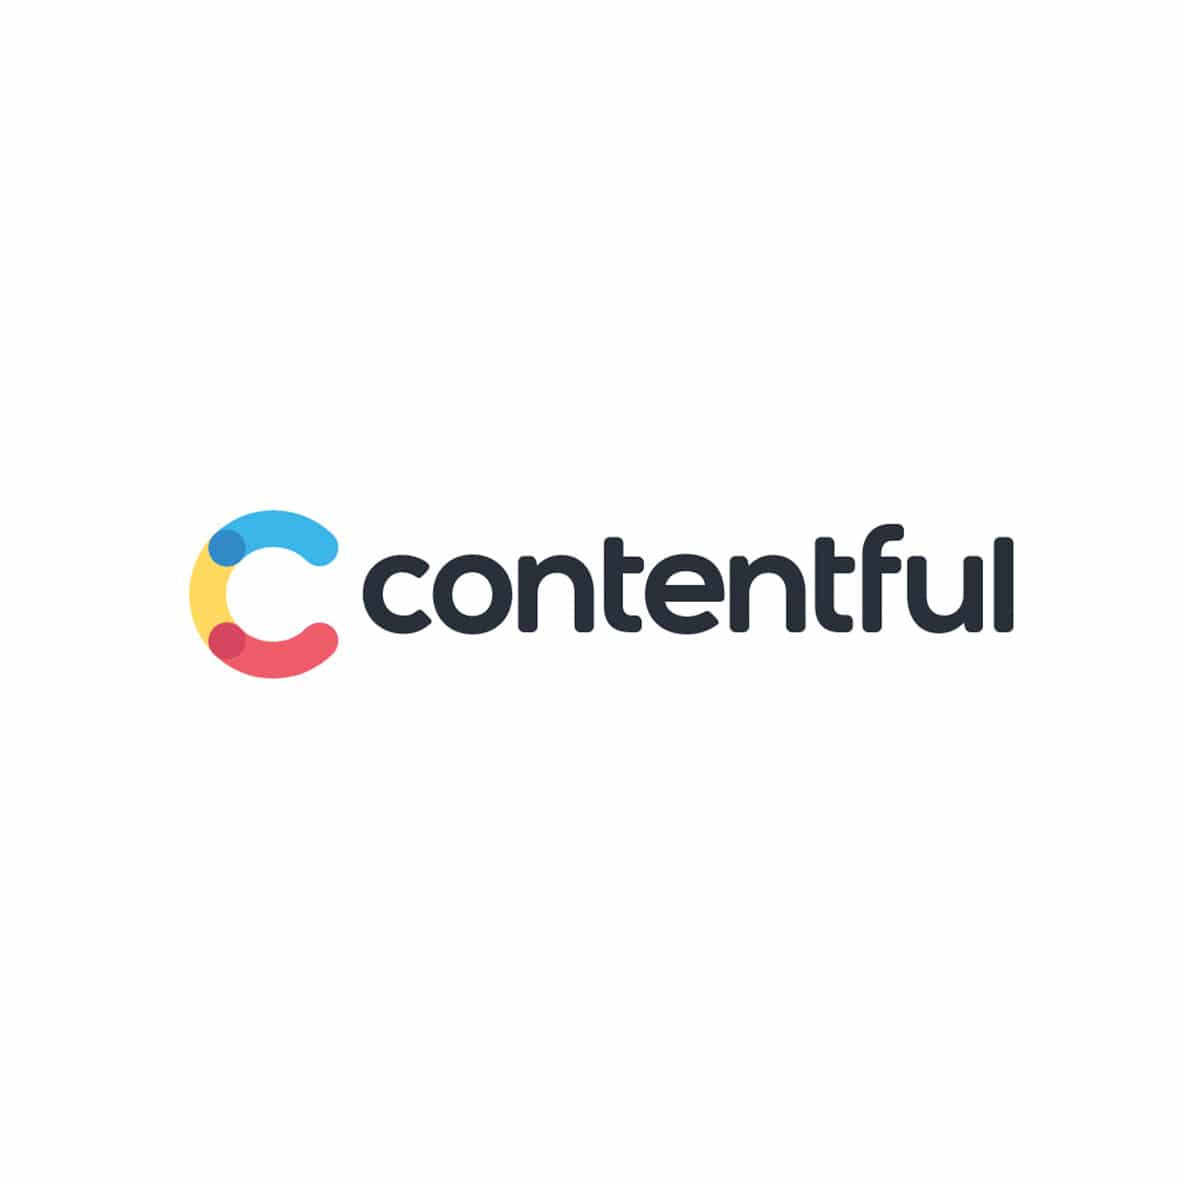 How to Comment Using the Contentful Management API